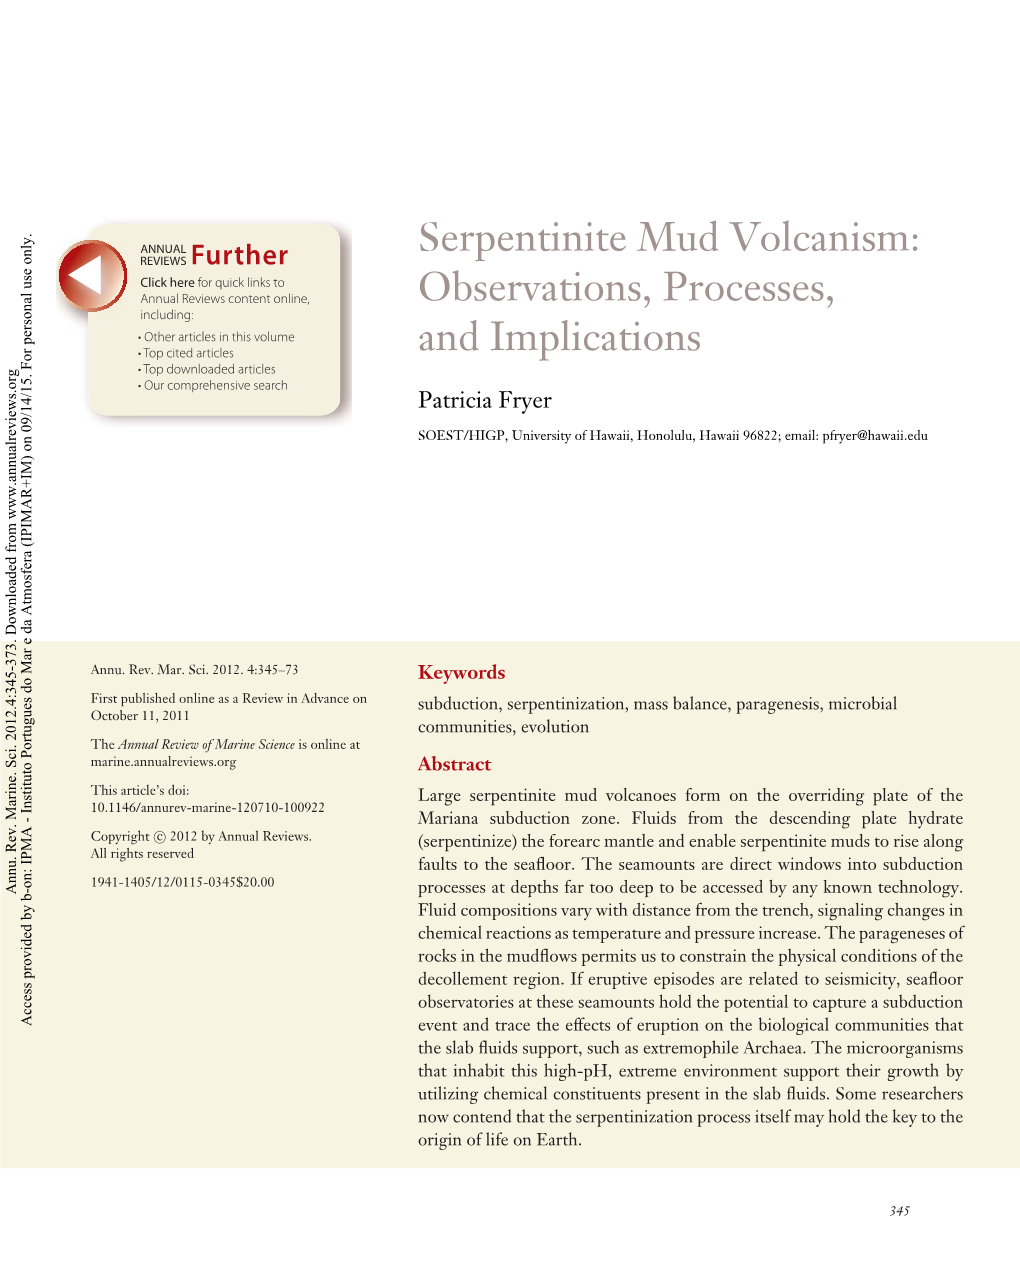 Serpentinite Mud Volcanism: Observations, Processes, and Implications